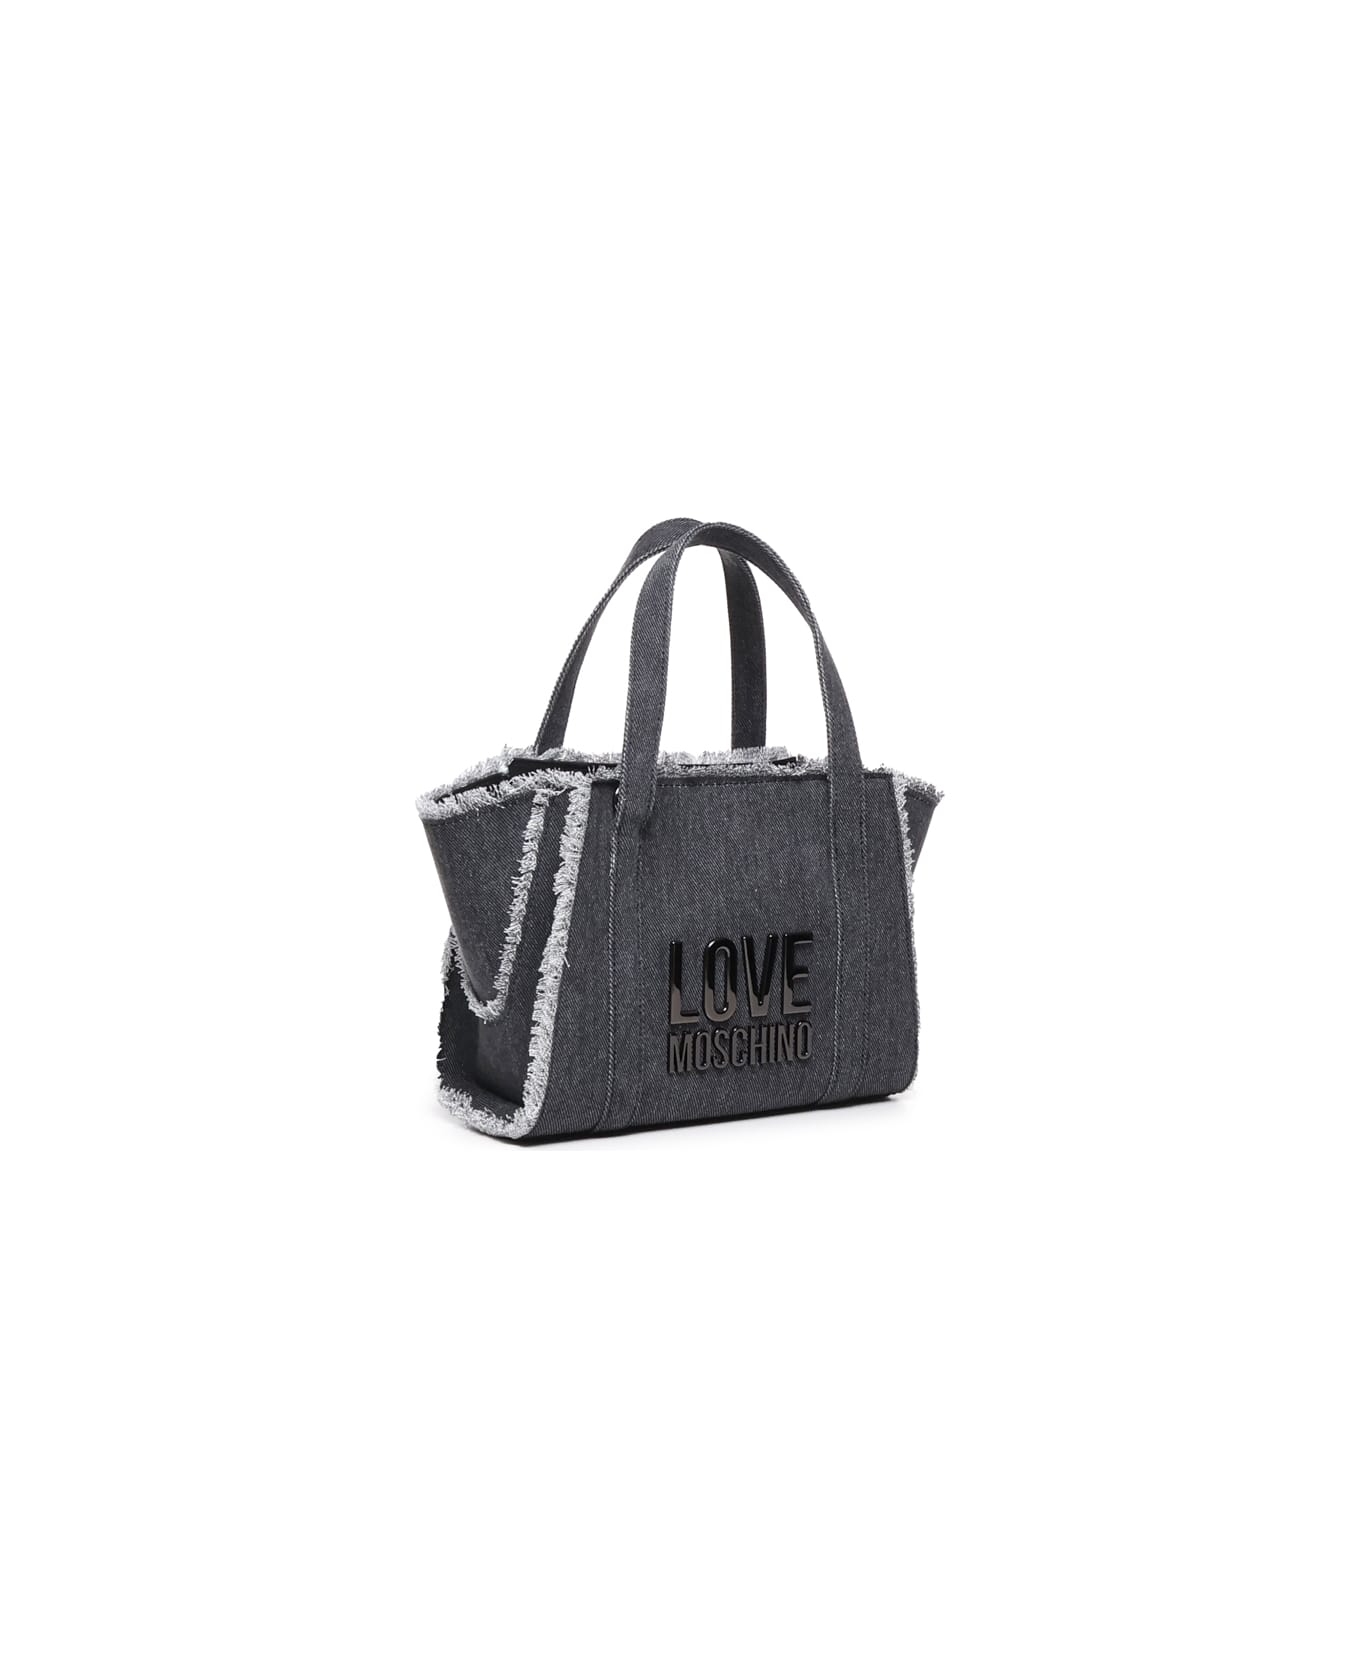 Love Moschino Tote Bag With Fringes - Black トートバッグ